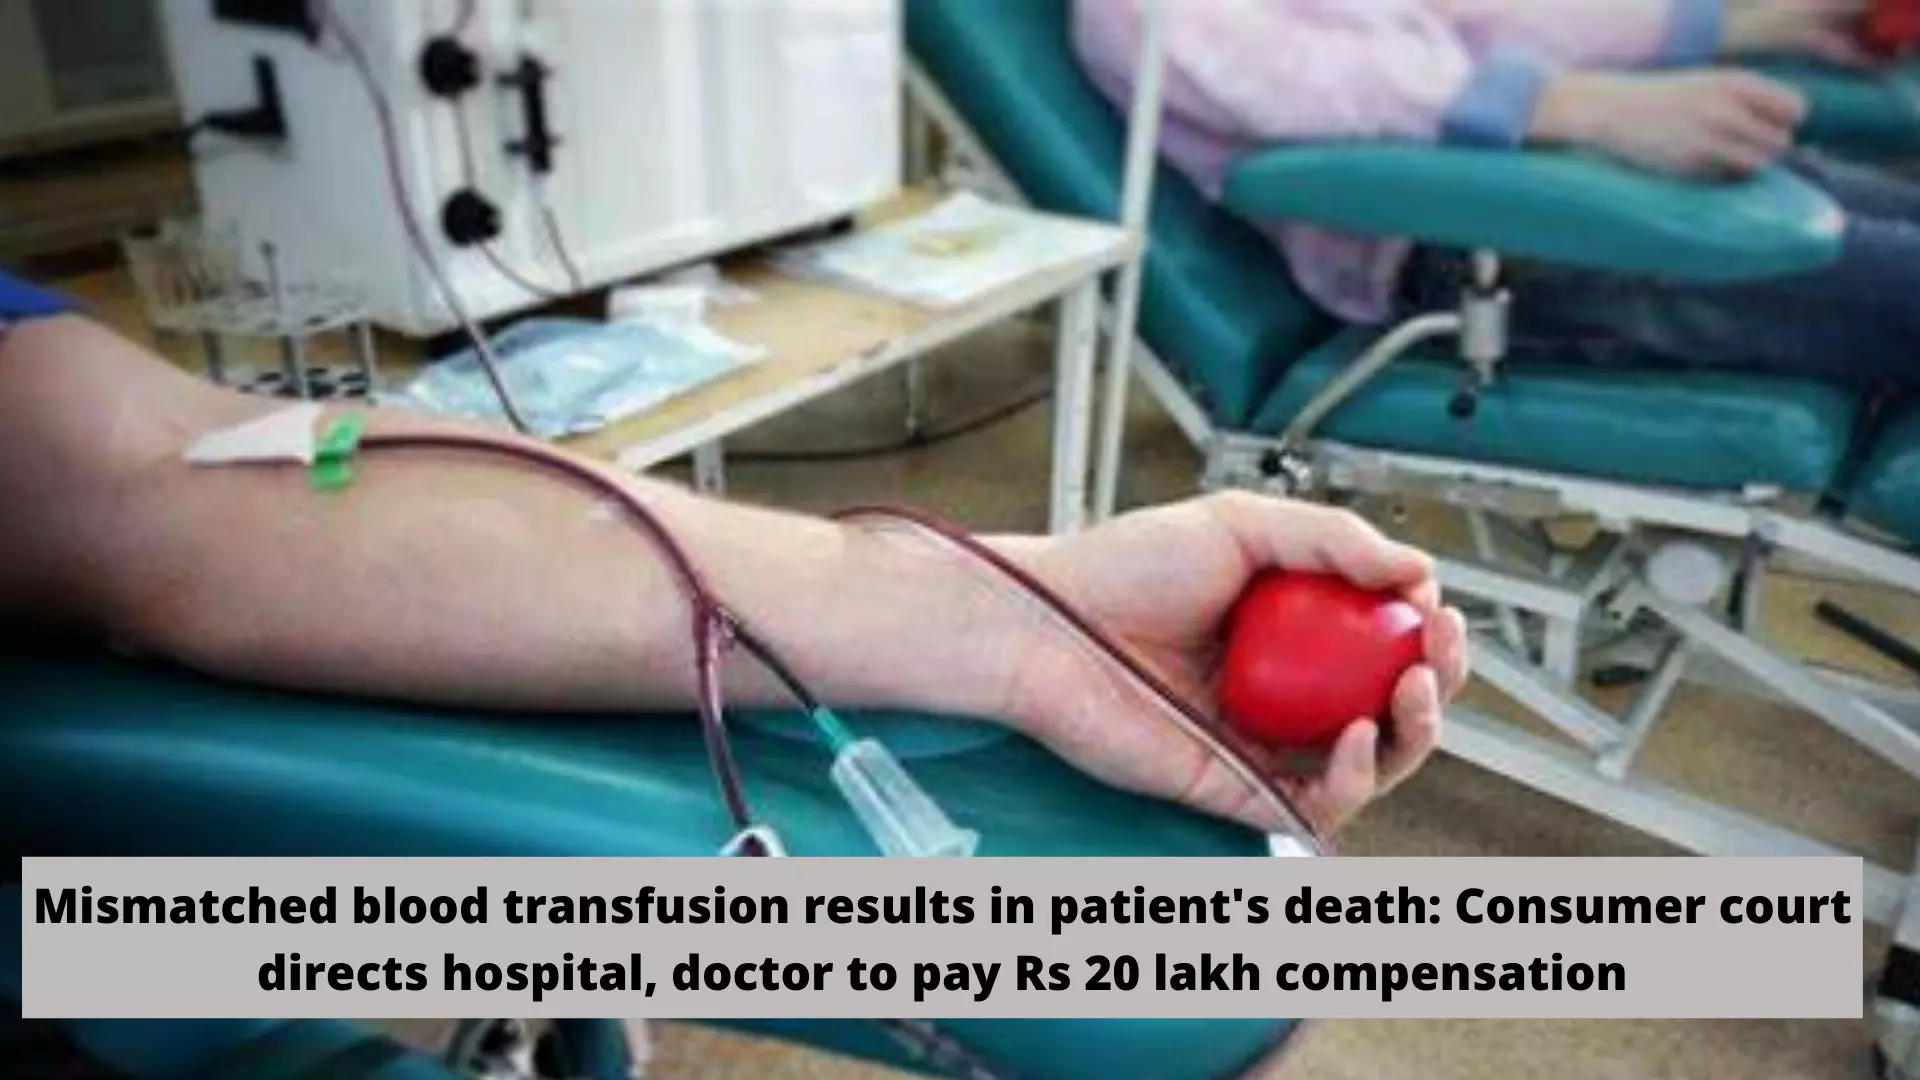 Blood transfusion mismatch causes patients death: Consumer Court directs Hospital, doctor to pay Rs 20 lakh compensation